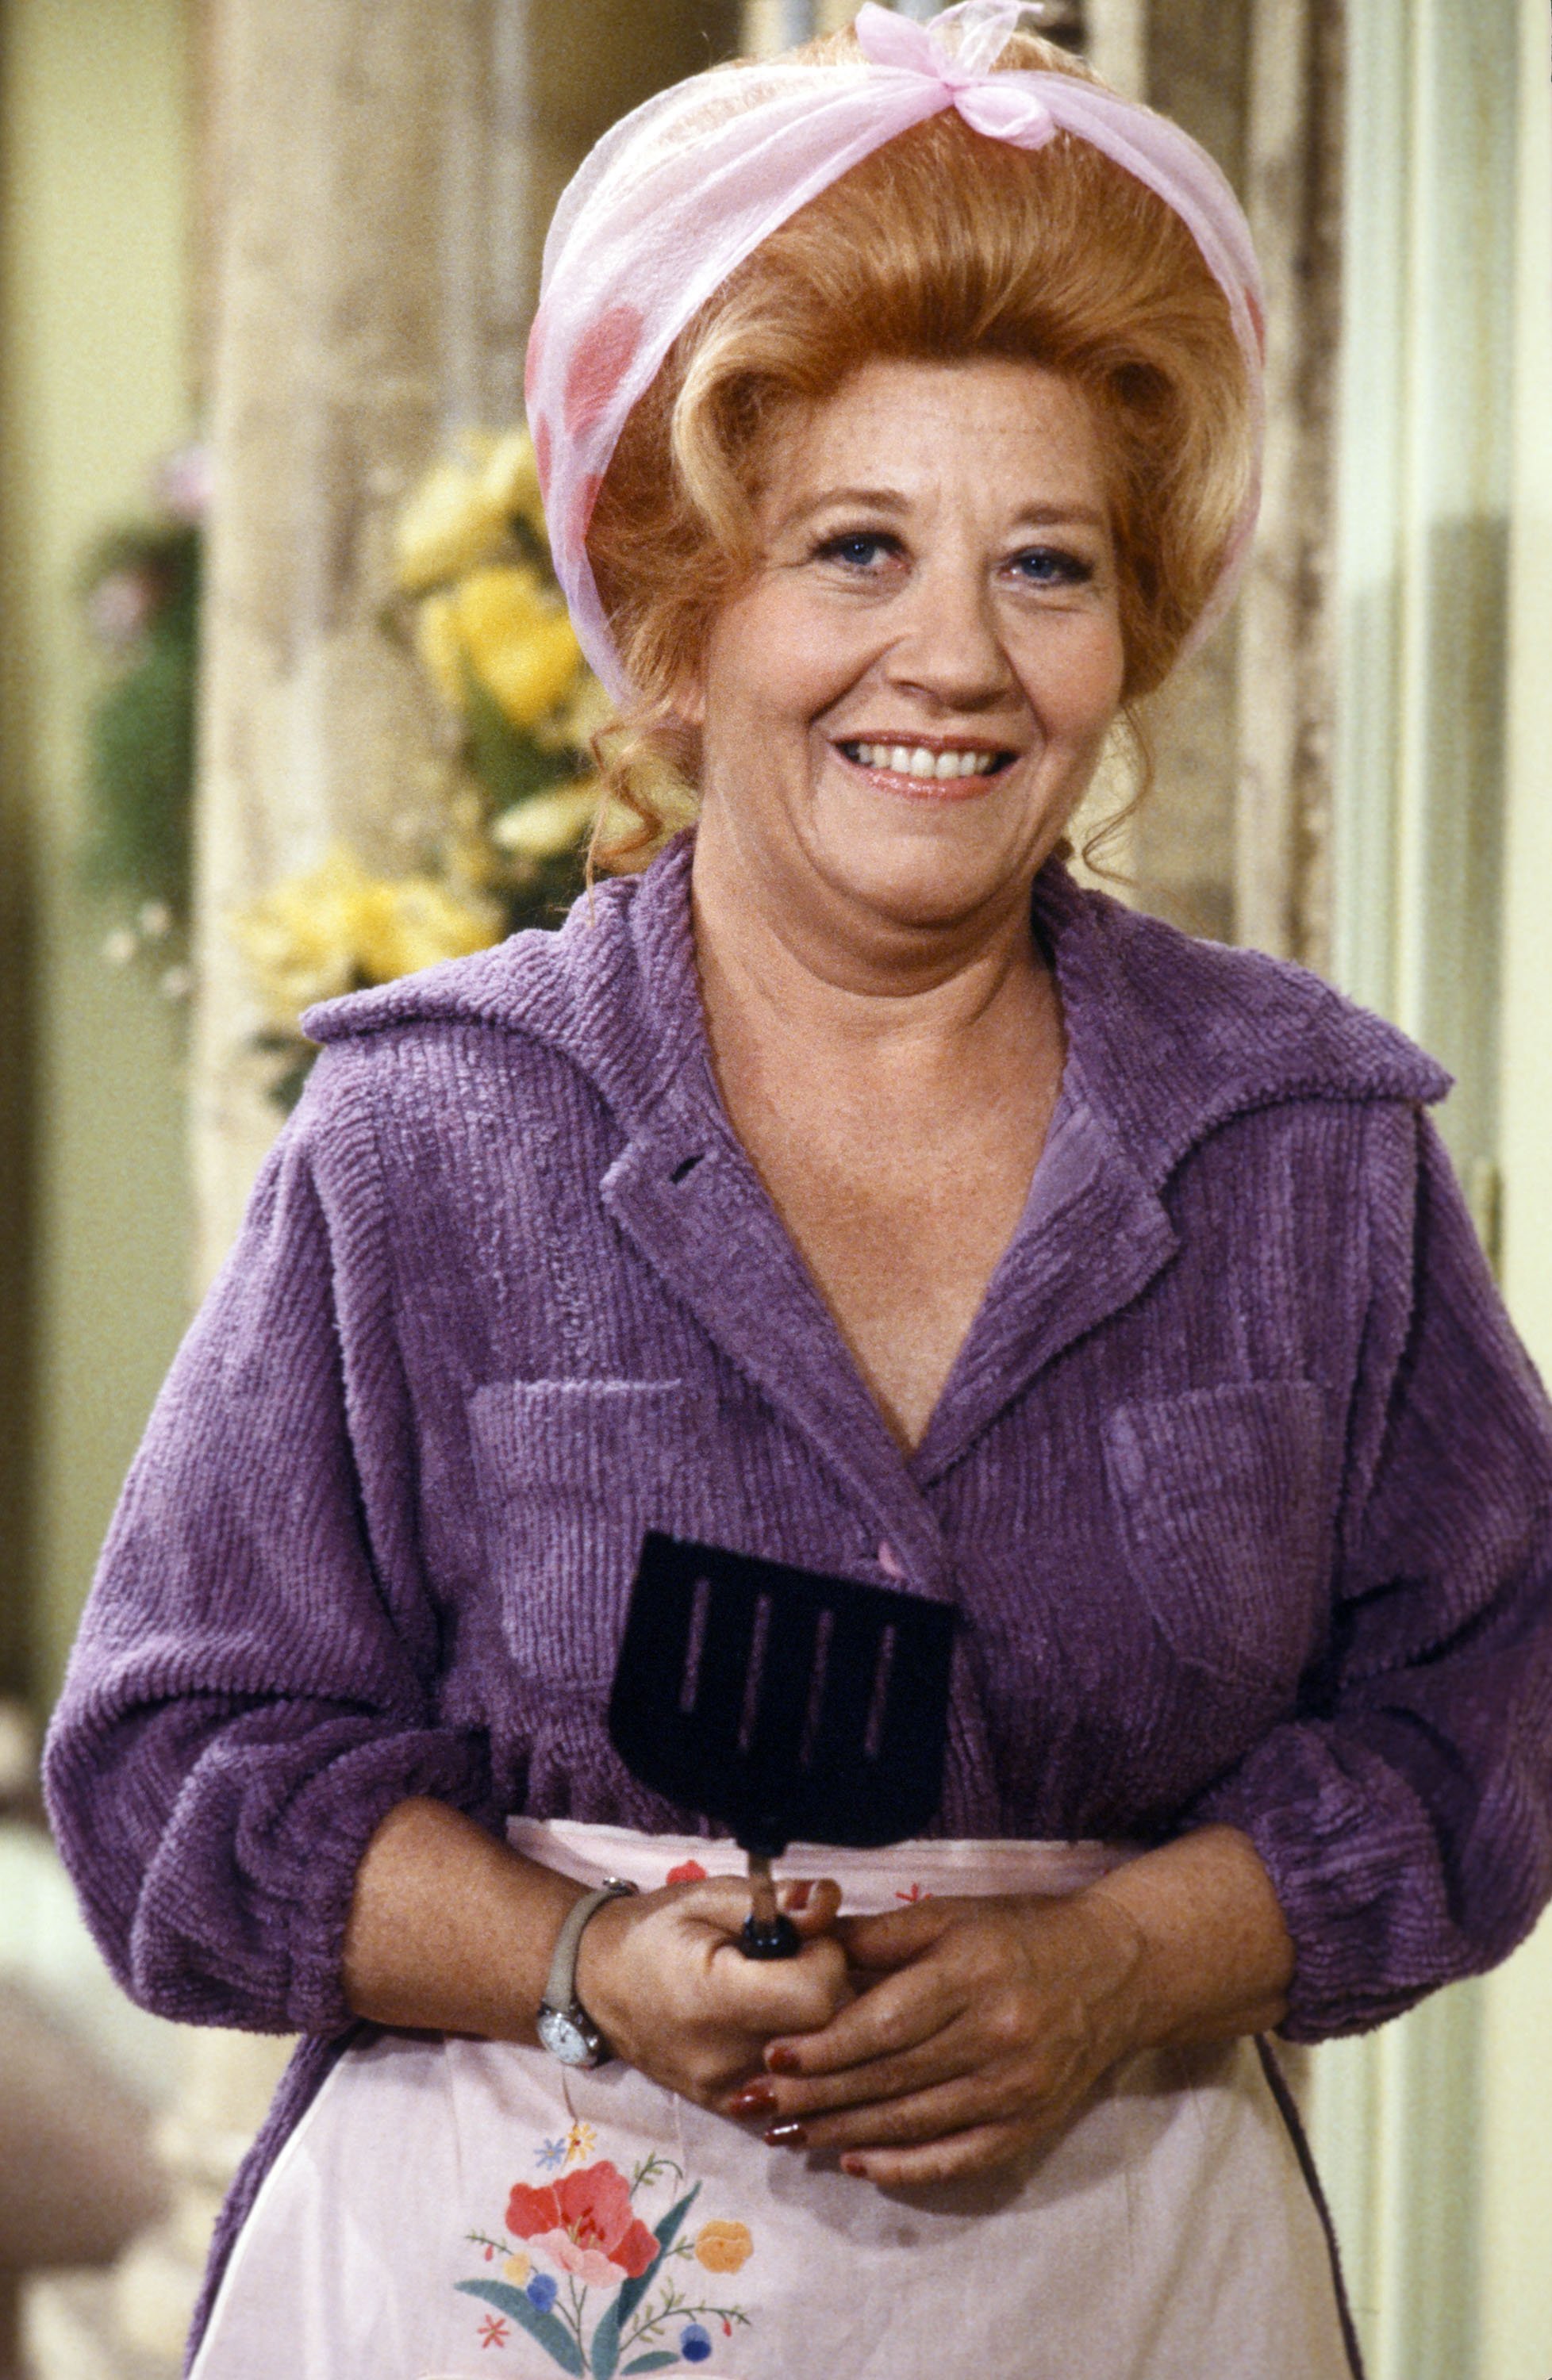 Charlotte Rae as Edna Garrett on TV show "Diff'rent Strokes" | Source: Getty Images